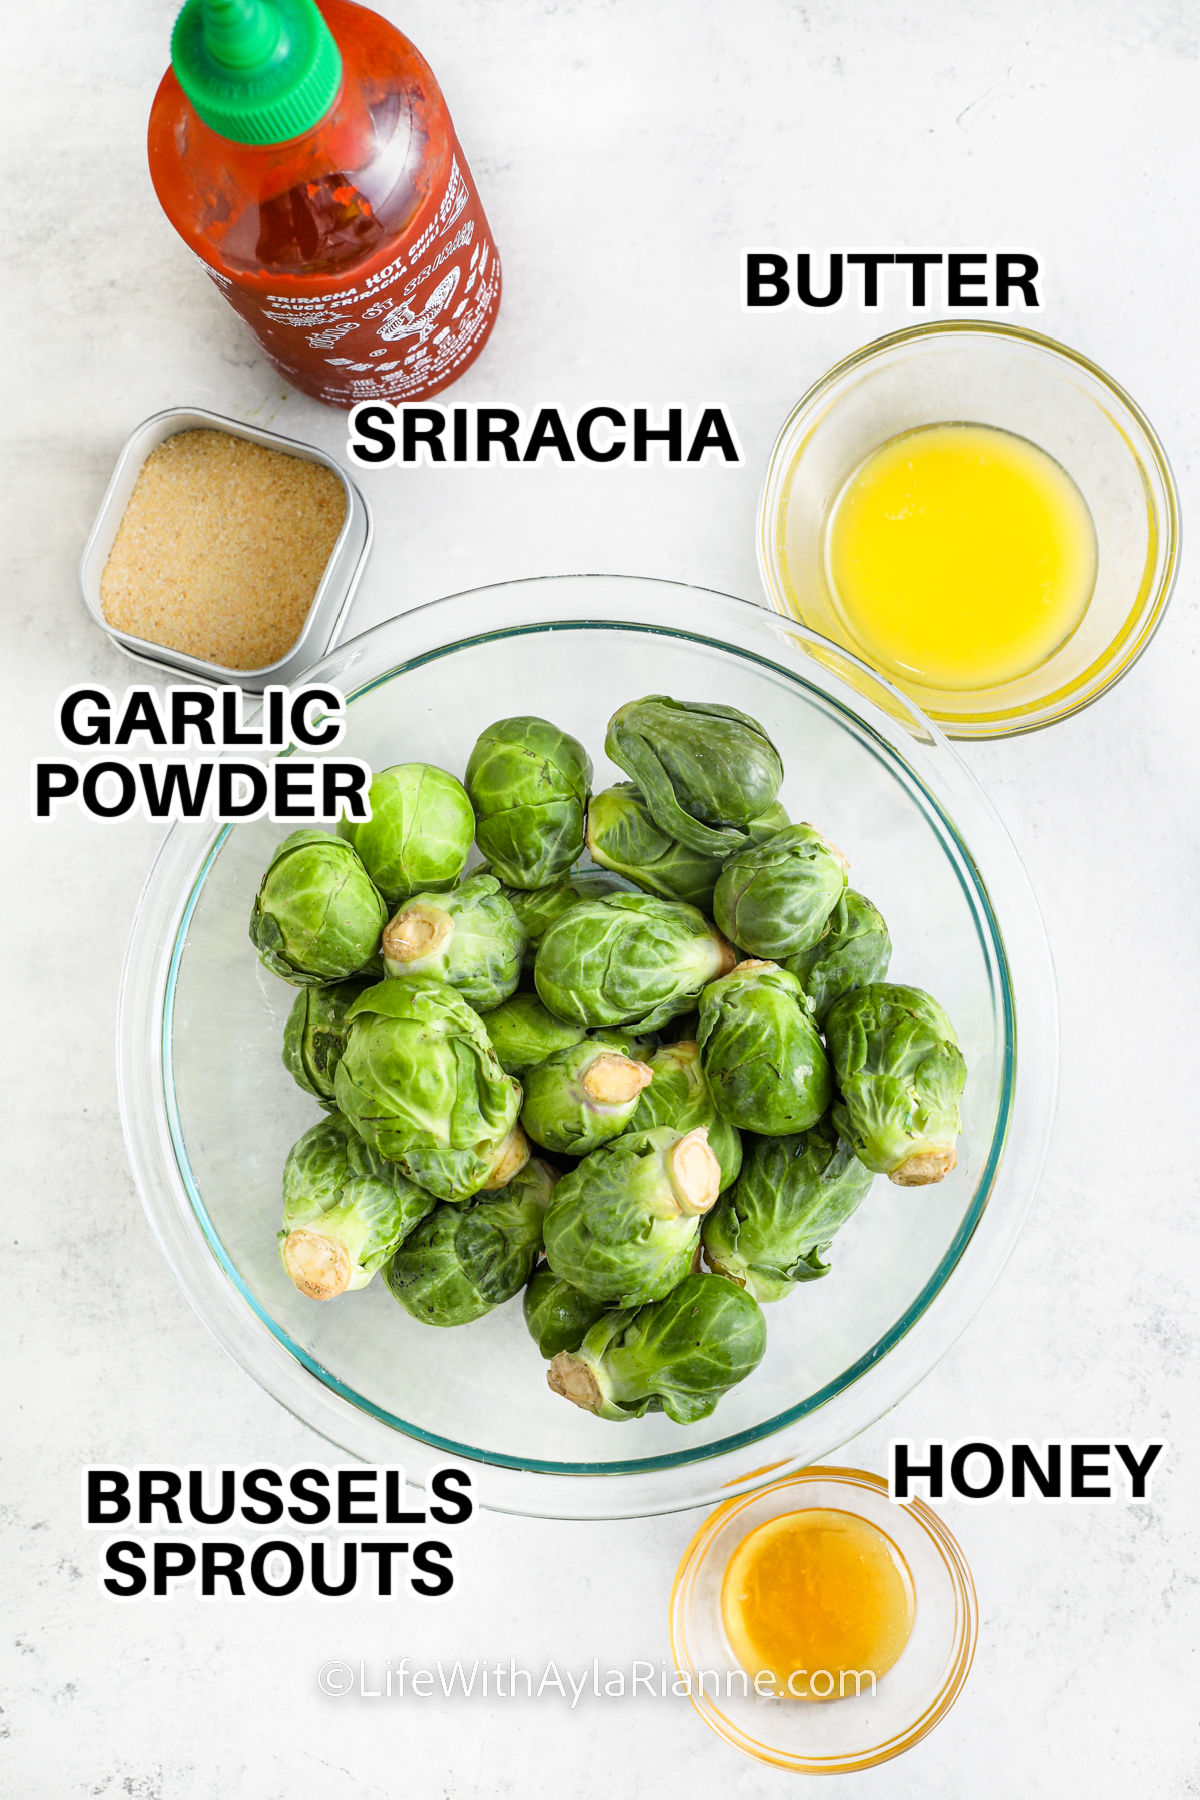 sriracha , butter , garlic powder , brussels sprouts and honey with labels to make Honey Sriracha Brussels Sprouts